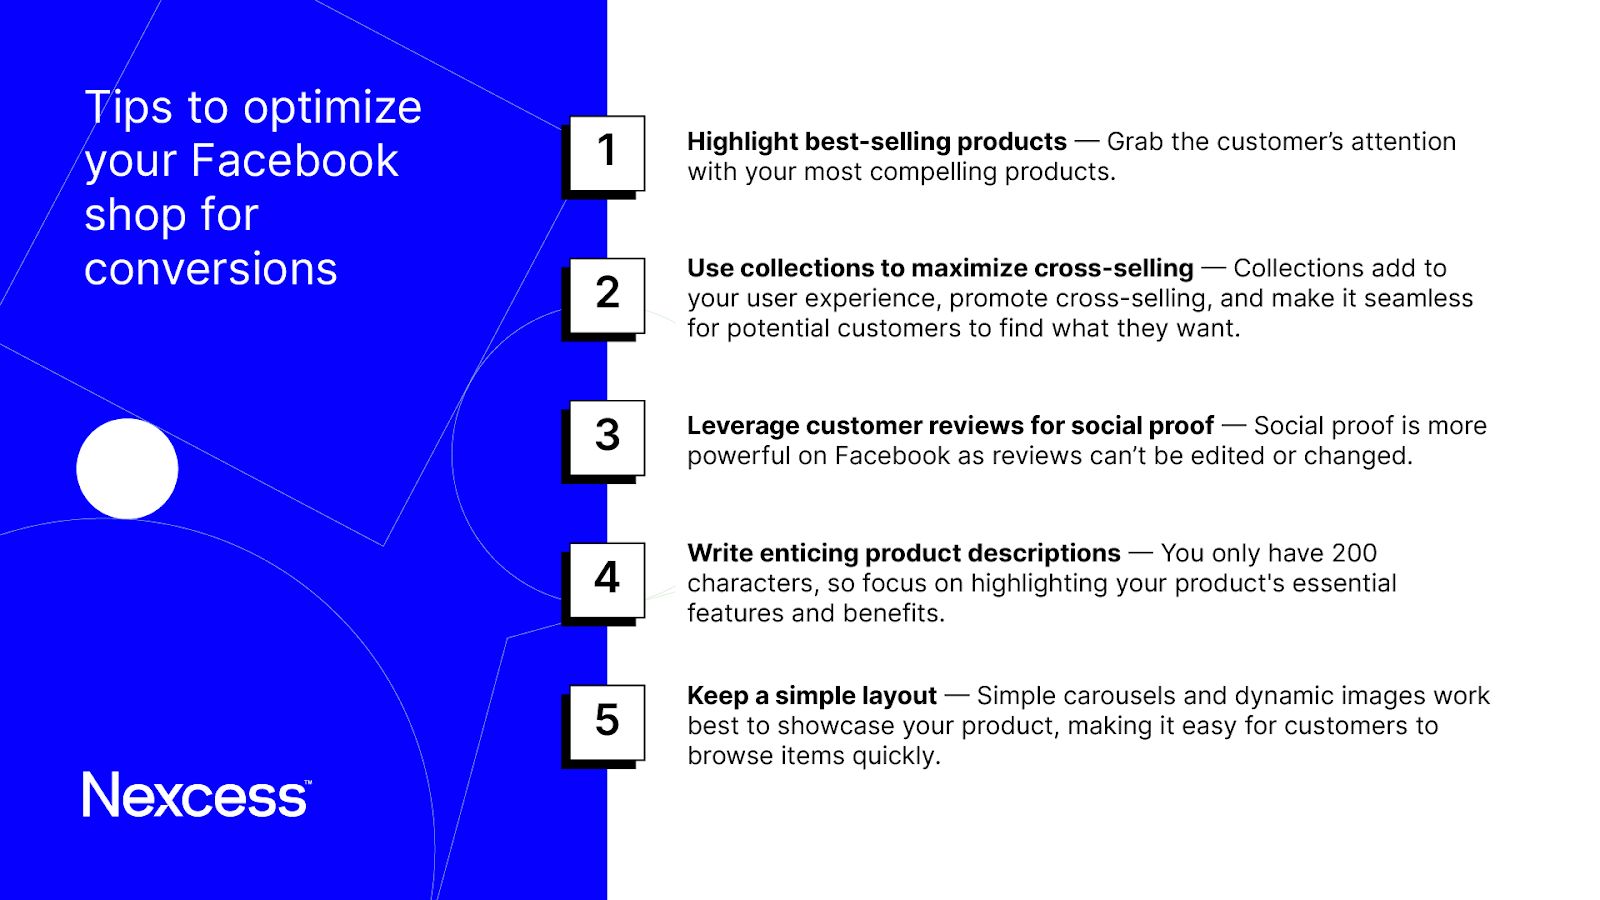 Tips to optimize your Facebook shop for conversions.